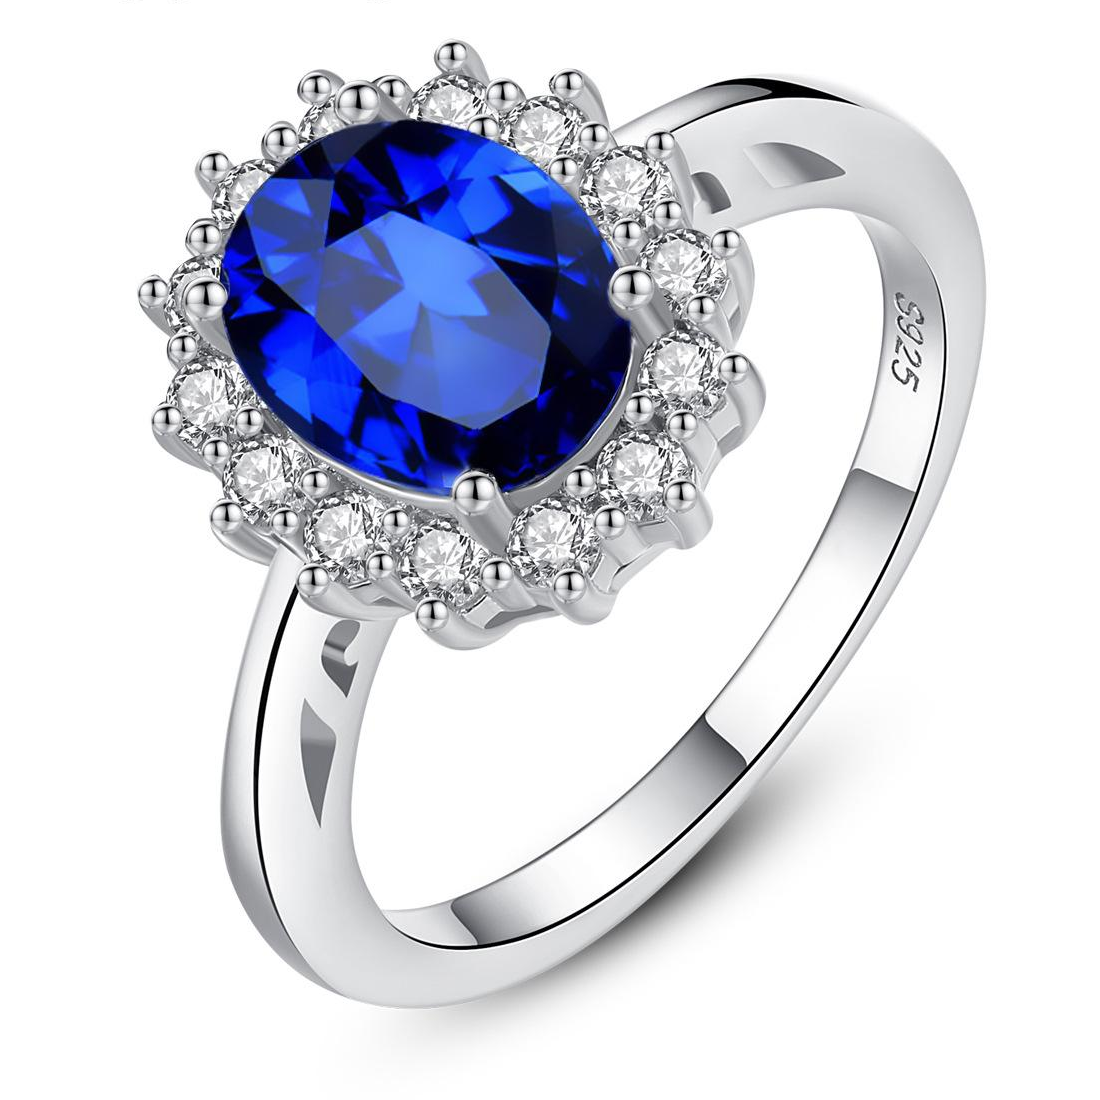 Factory Price Royal Blue Austrian Crystal 925 Sterling Silver Rings Beautiful Fashion Gift Jewelry for woman